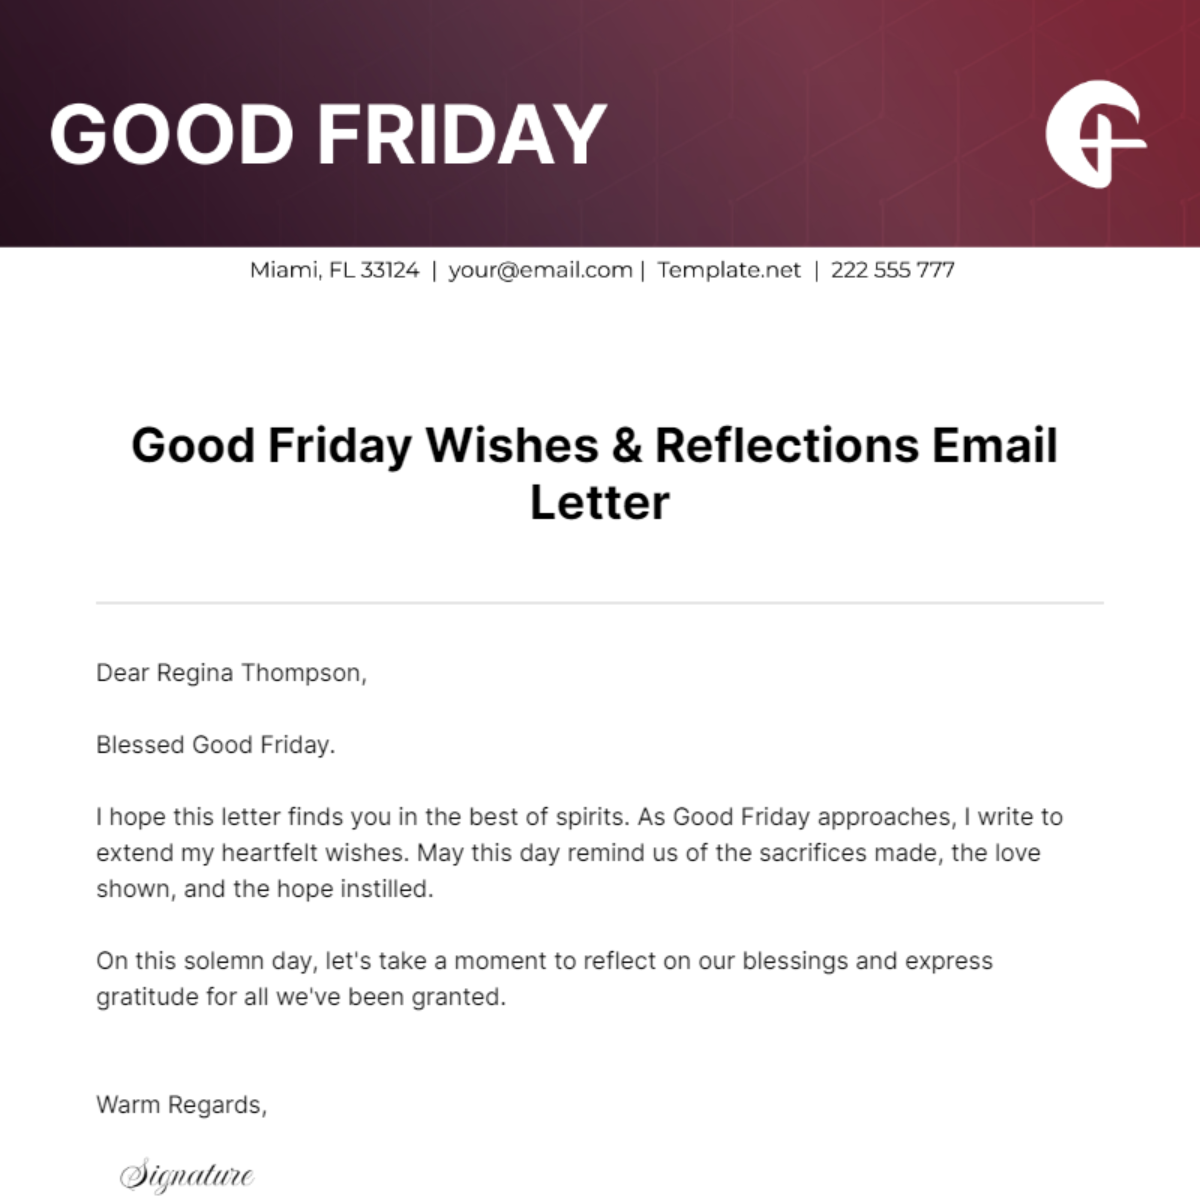 Free Good Friday Wishes & Reflections Email Letter Template